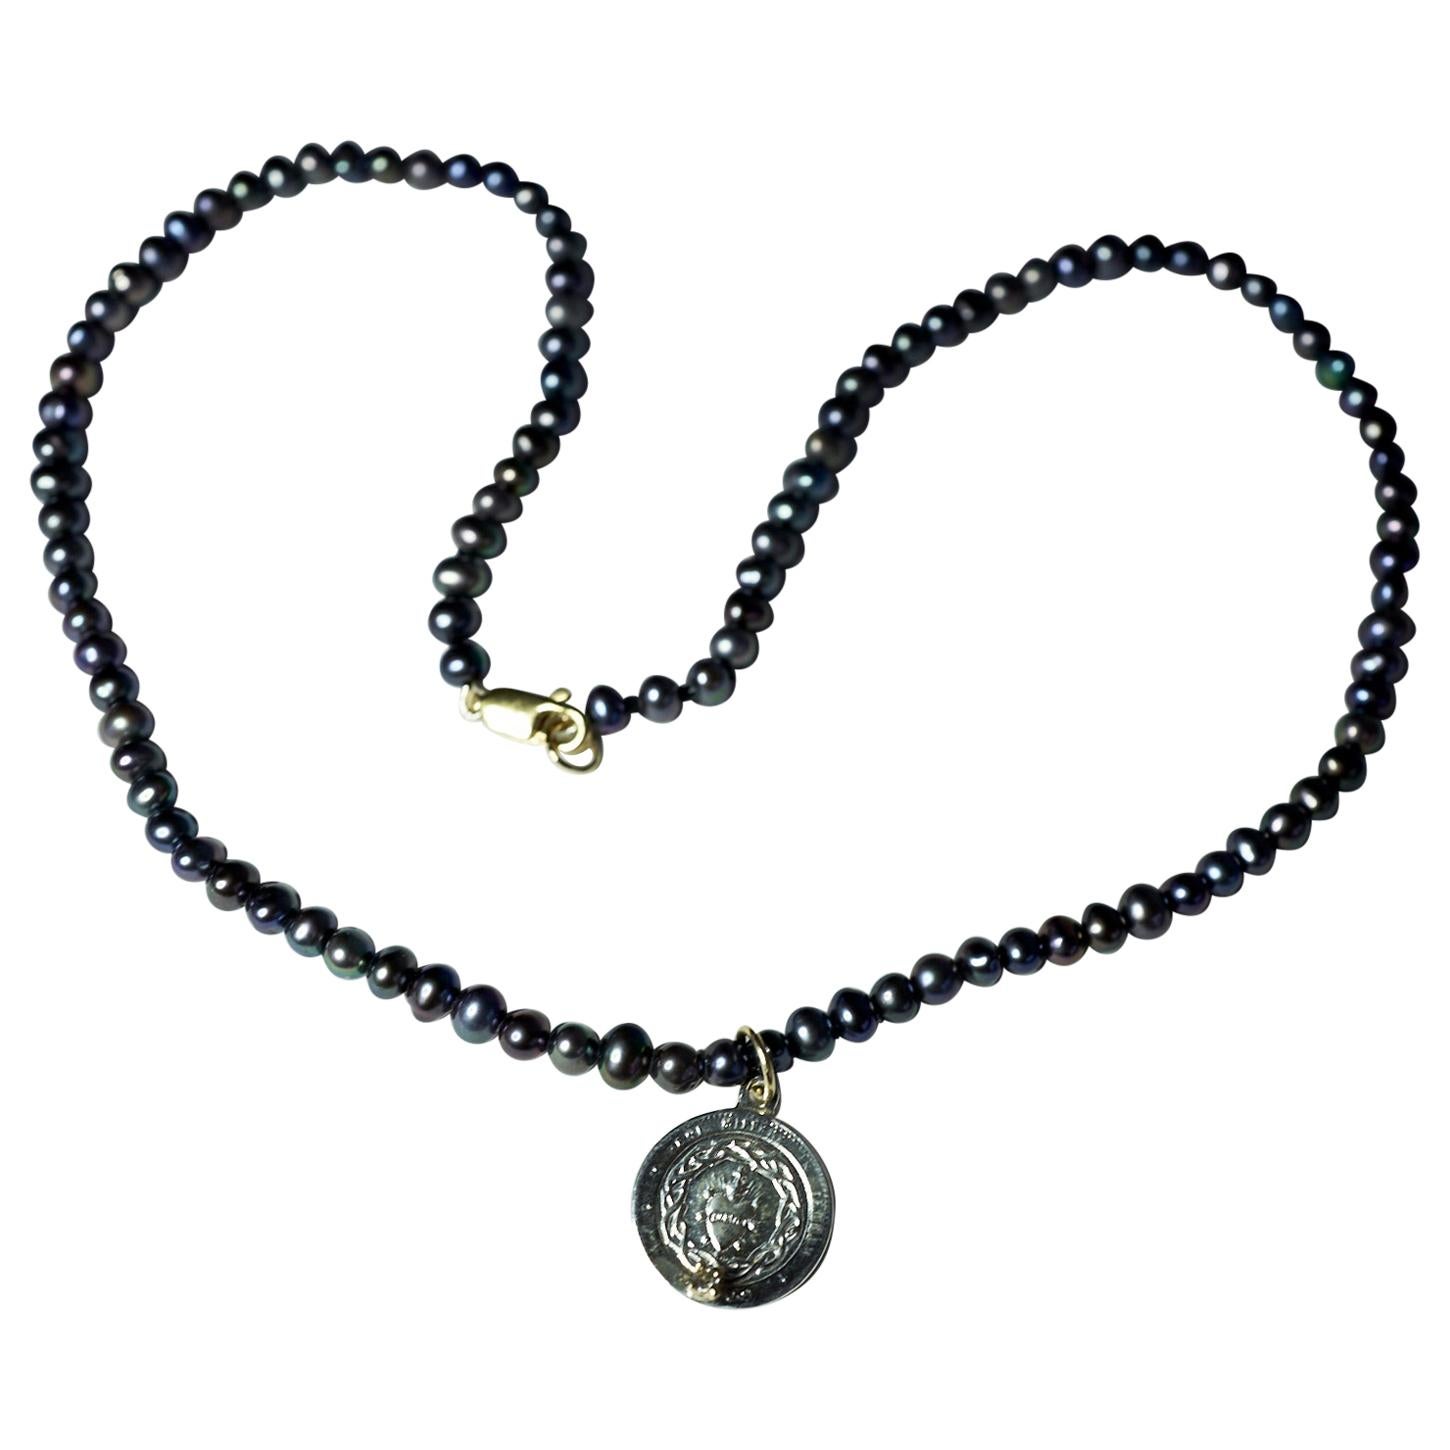 Beaded pearl black heart charm necklace